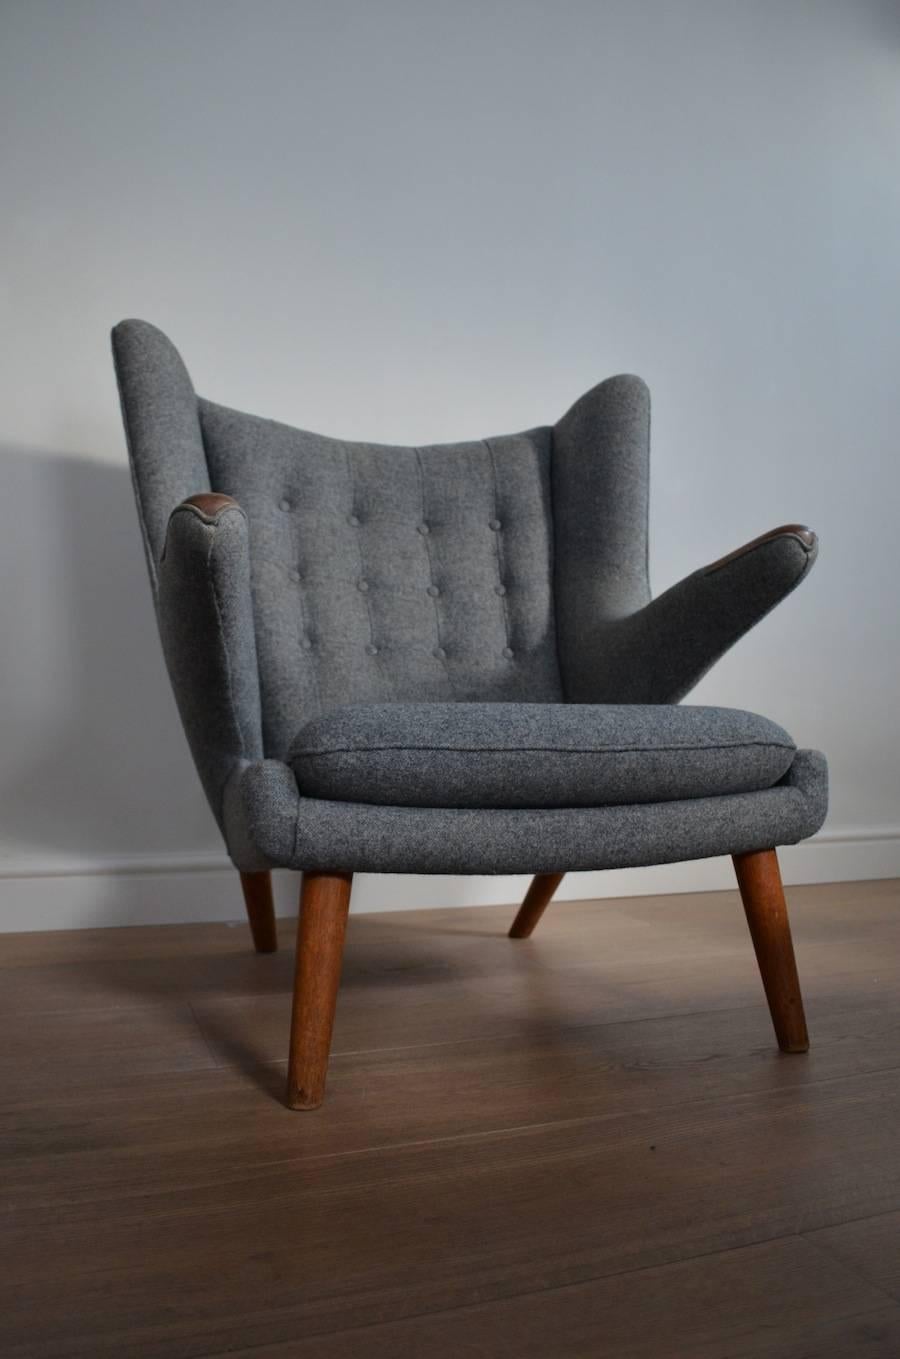 An original model AP19 'Papa Bear Chair' designed in 1951 by Hans J. Wegner for A. P. Stolen, Denmark. 

Featuring oak 'paws' and legs upholstered in grey wool fabric.

Very good condition for its age, with lovely patina to wood.

Dimensions: